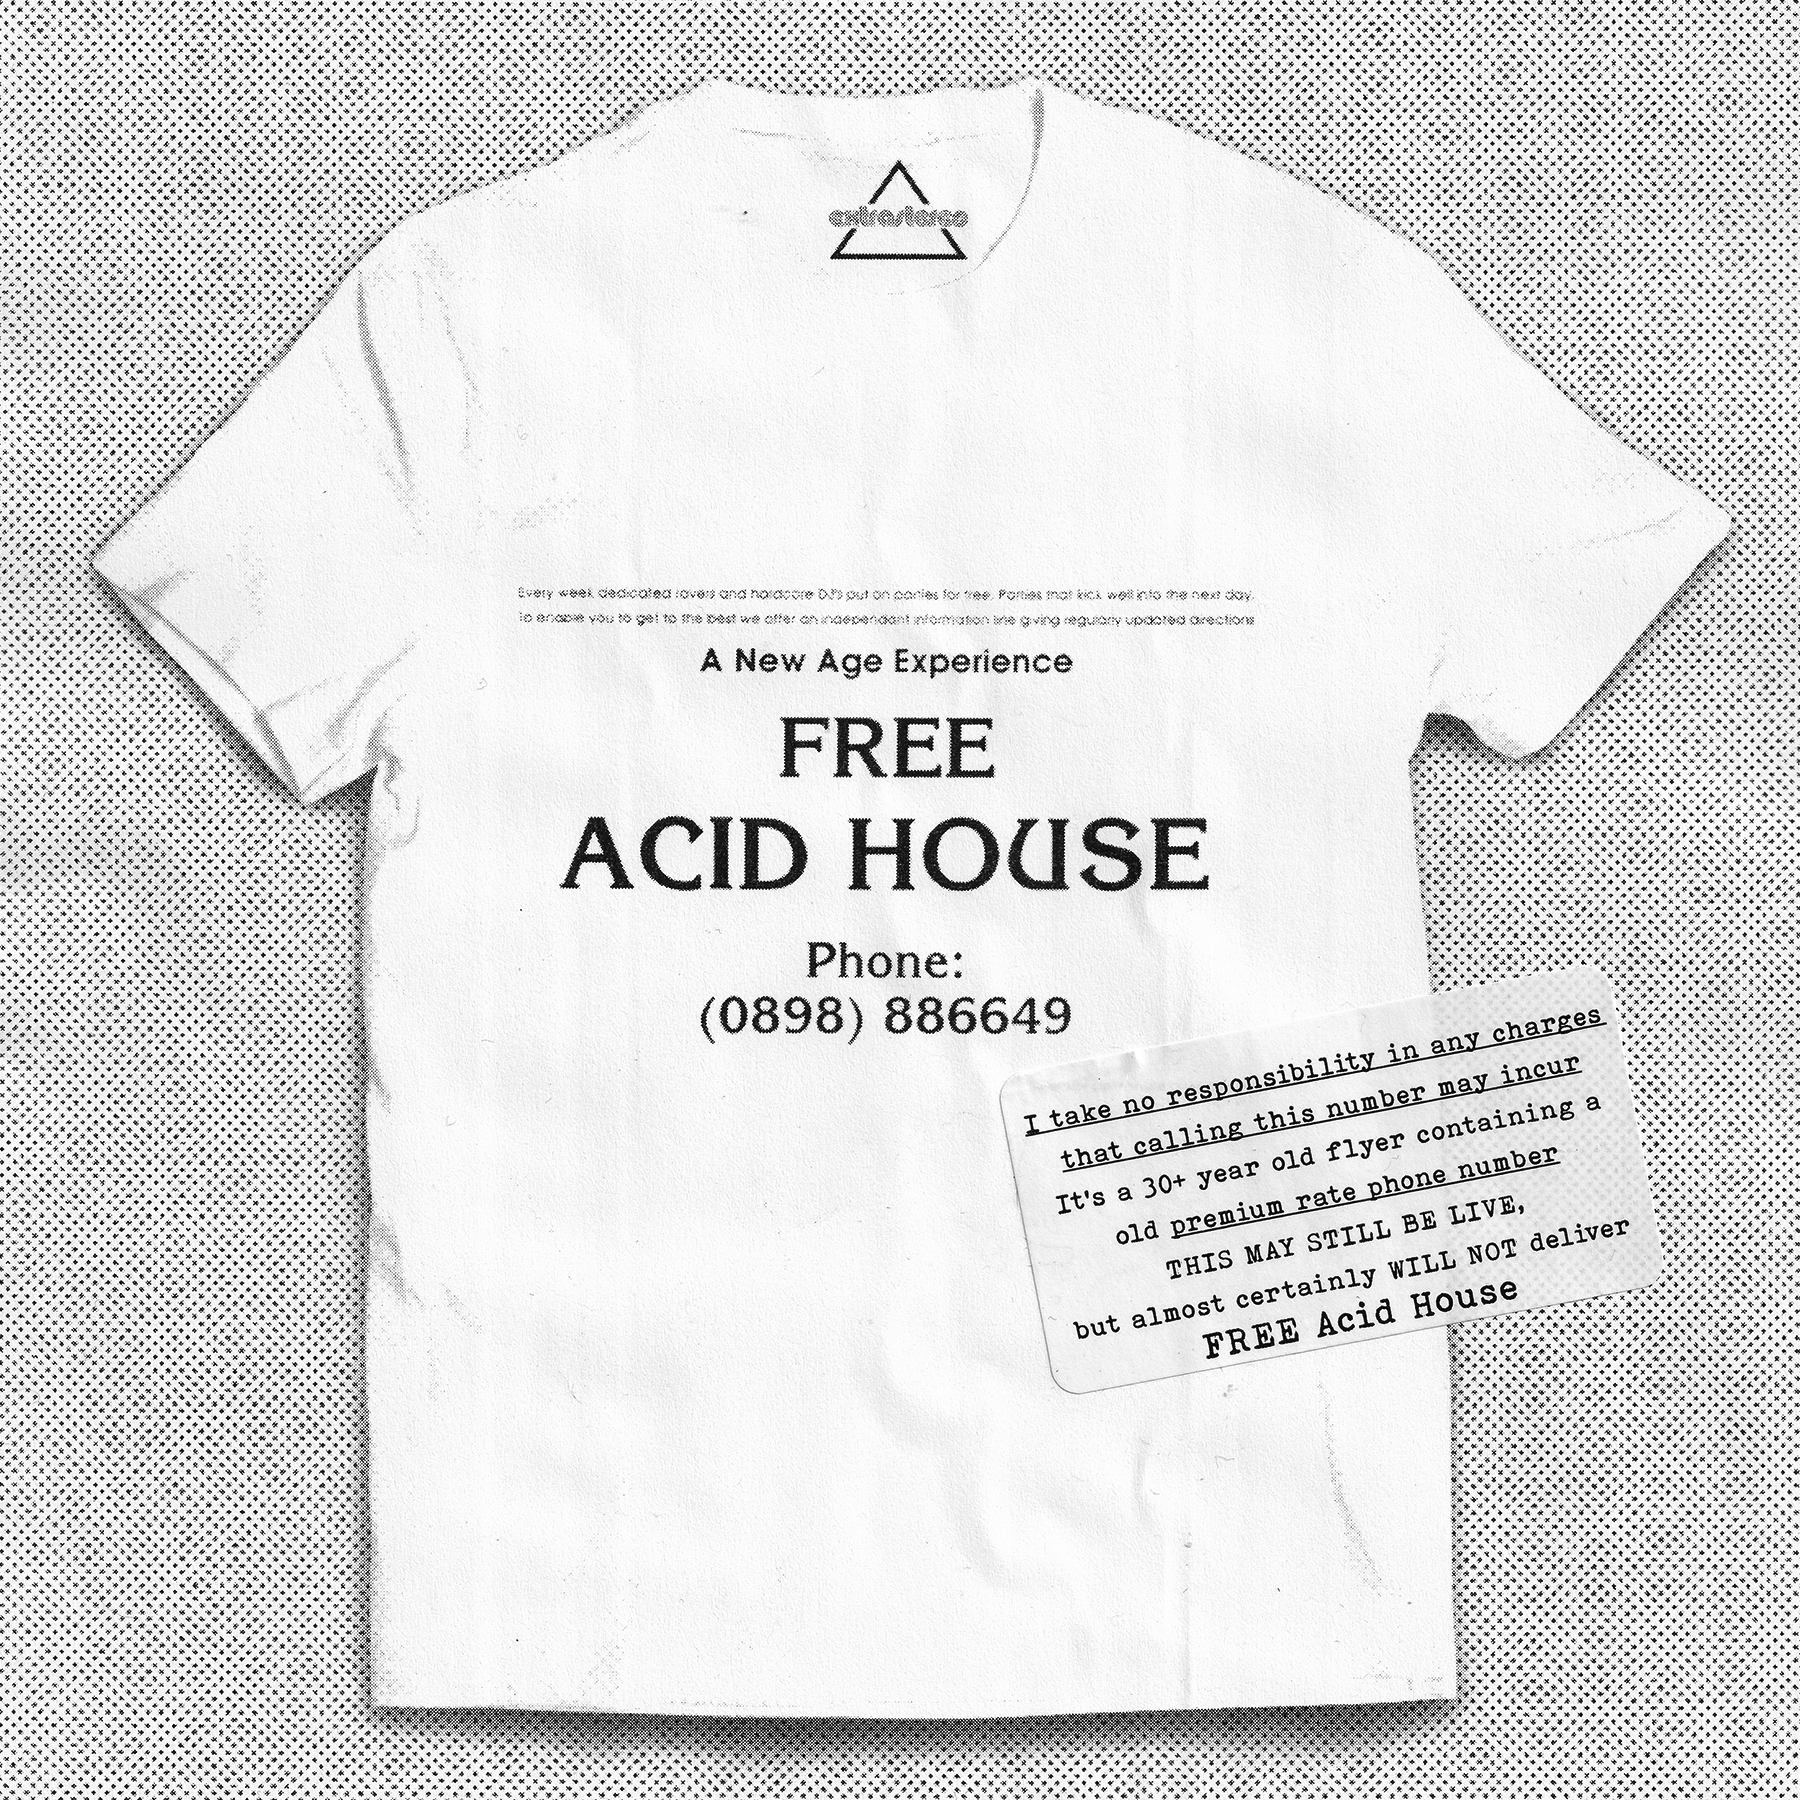 extrastereo - 'Free Acid House' T-shirt - DO NOT PHONE THIS NUMBER